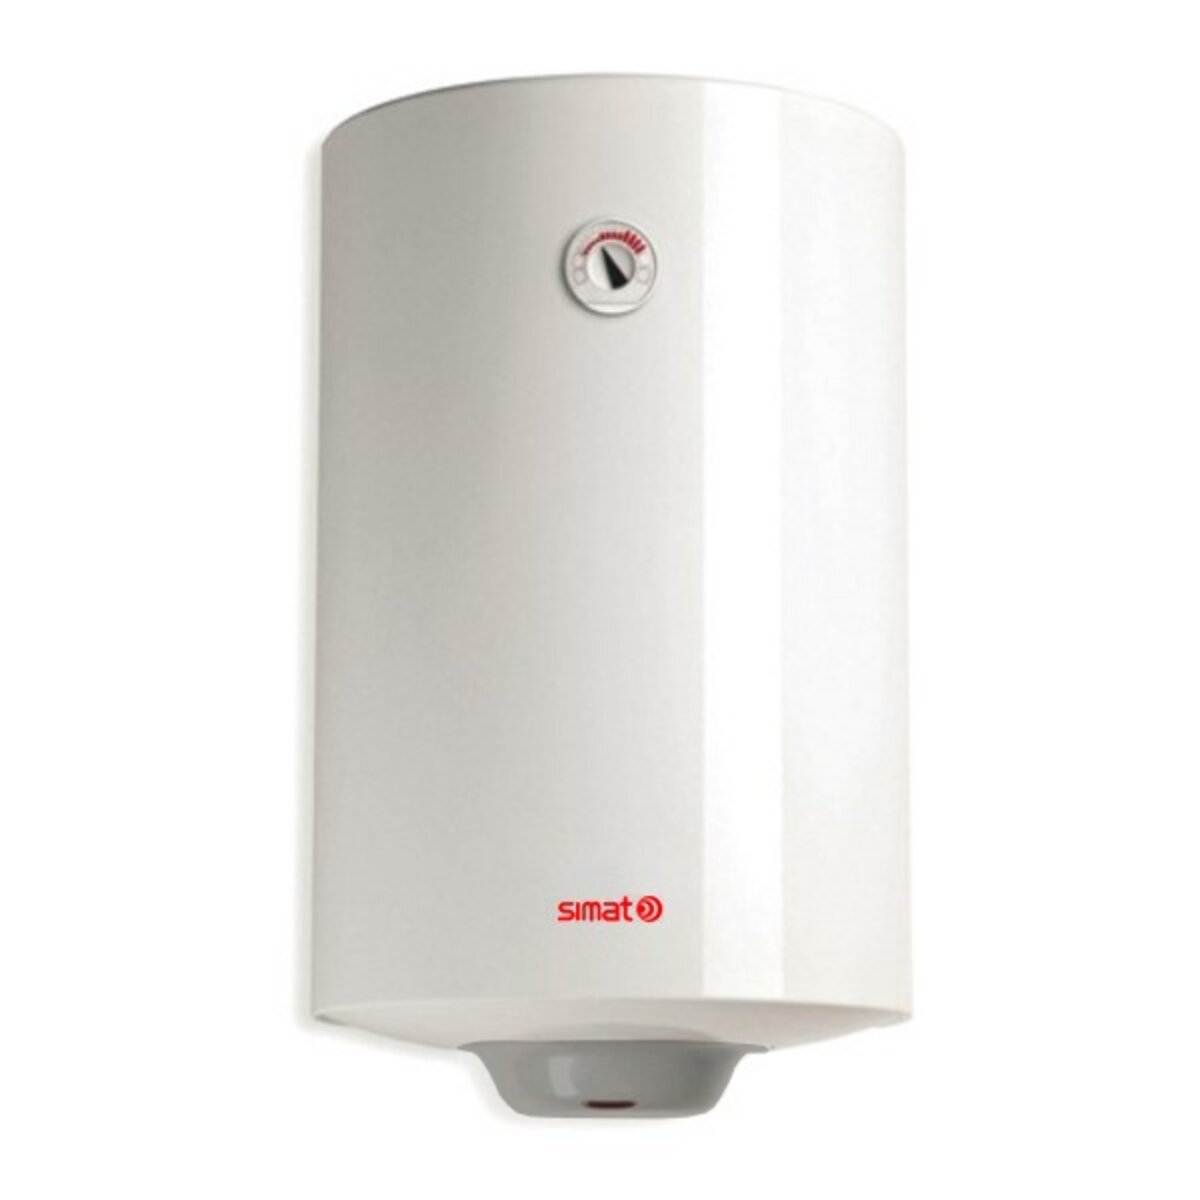 Simat electric water heater by Ariston 50 liters vertical 2 year warranty